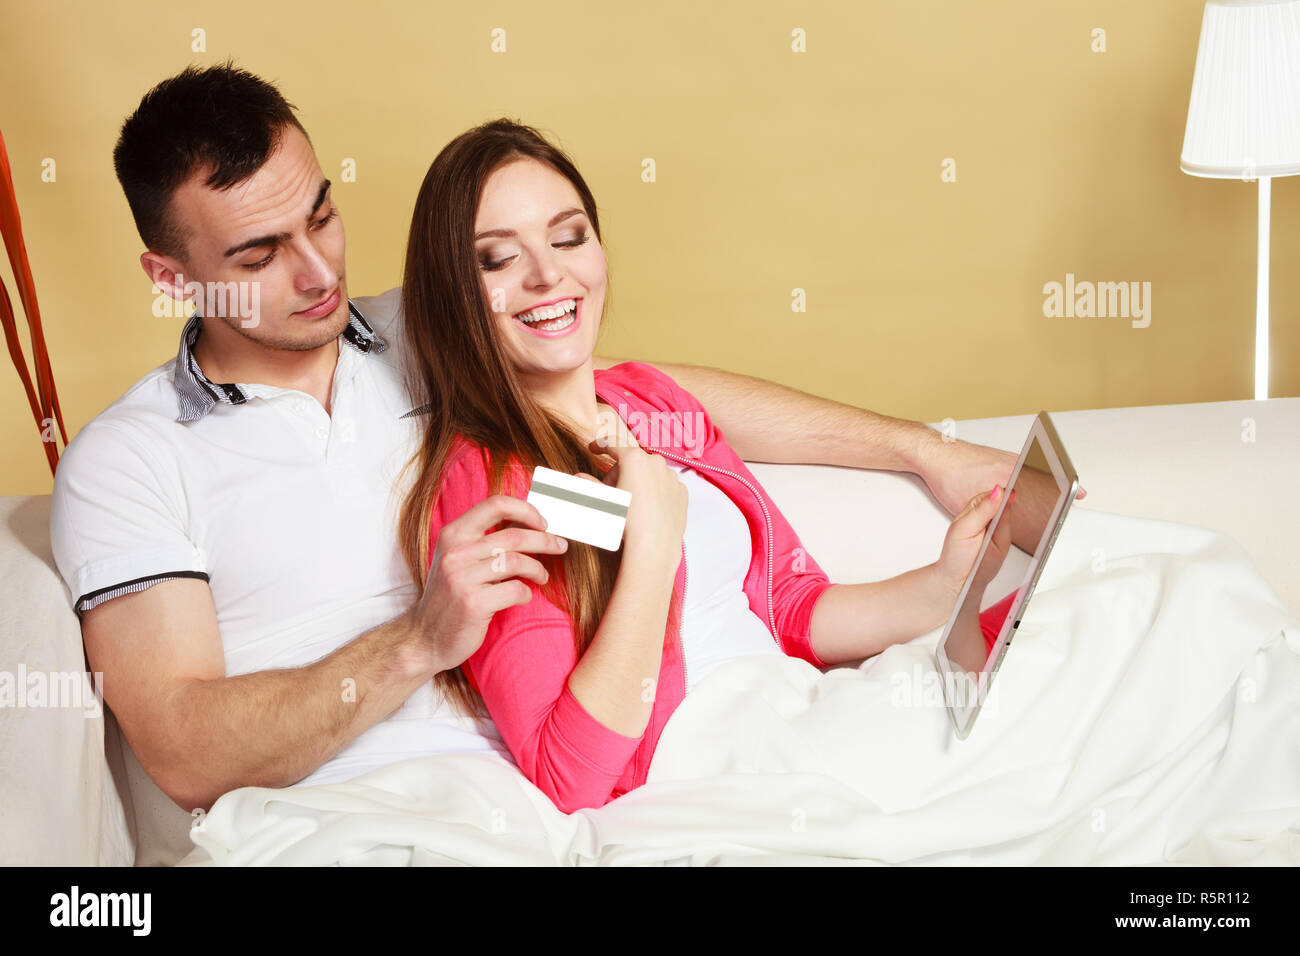 Shopping consumerism leisure and people concept. Young couple with tablet pc and credit card on sofe at home doing shopping on internet Stock Photo